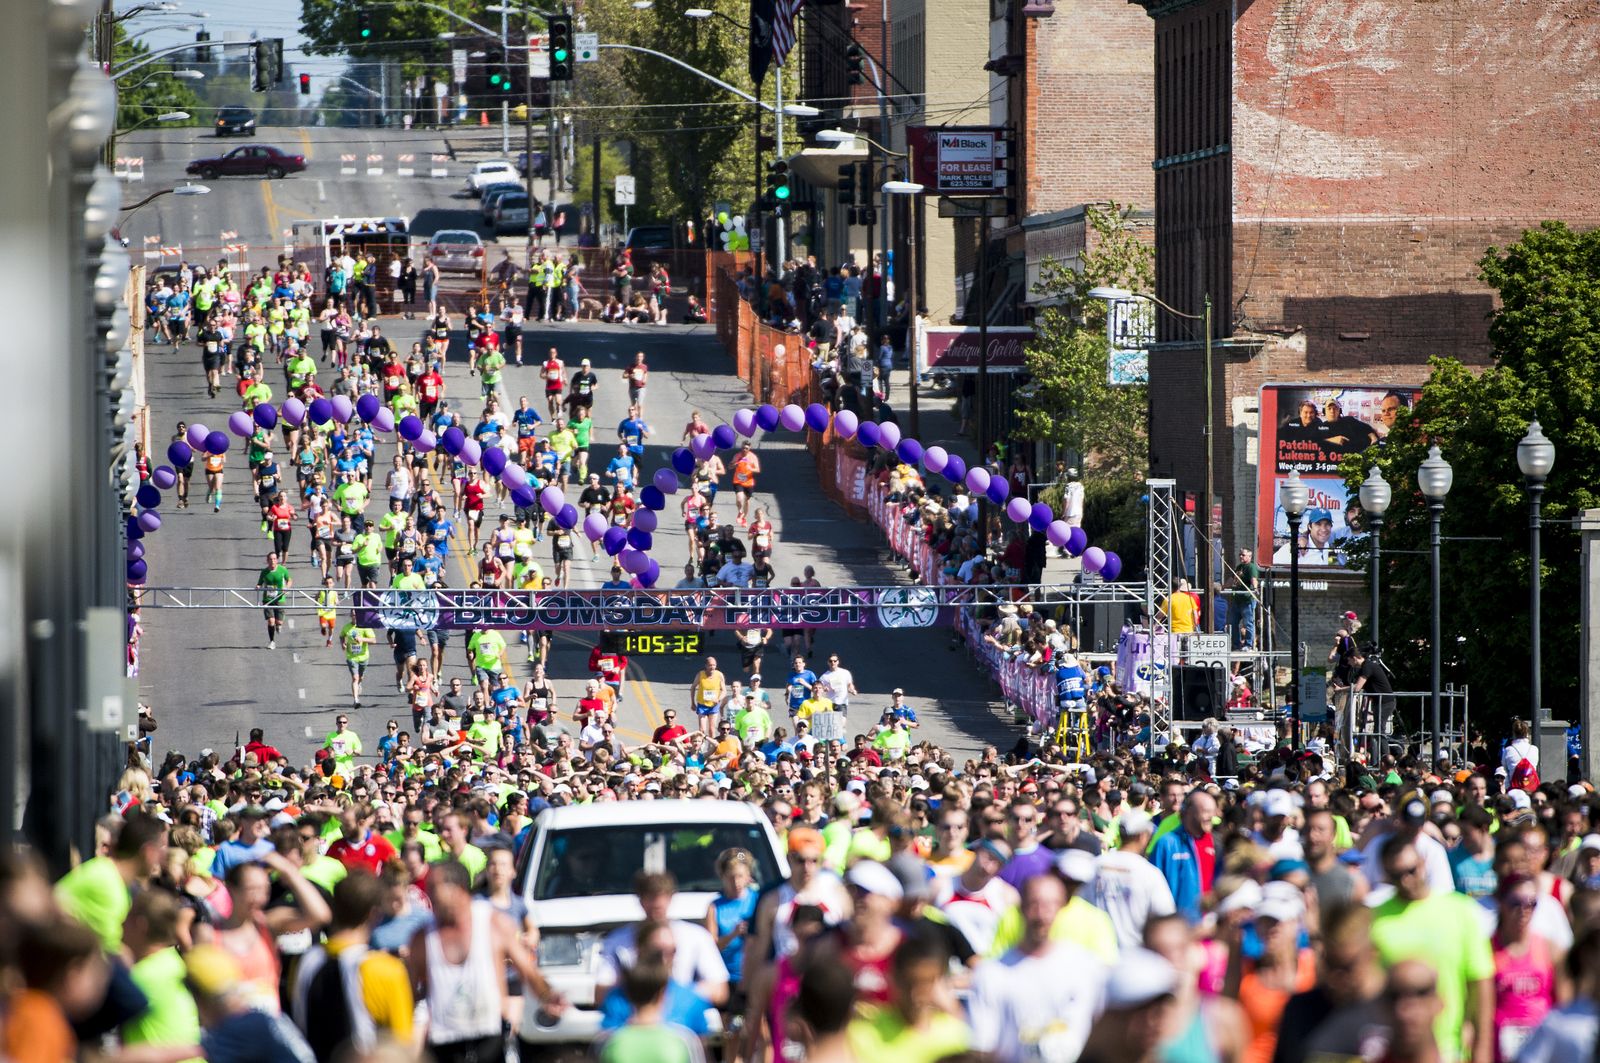 Bloomsday 2015 - May 3, 2015 | The Spokesman-Review